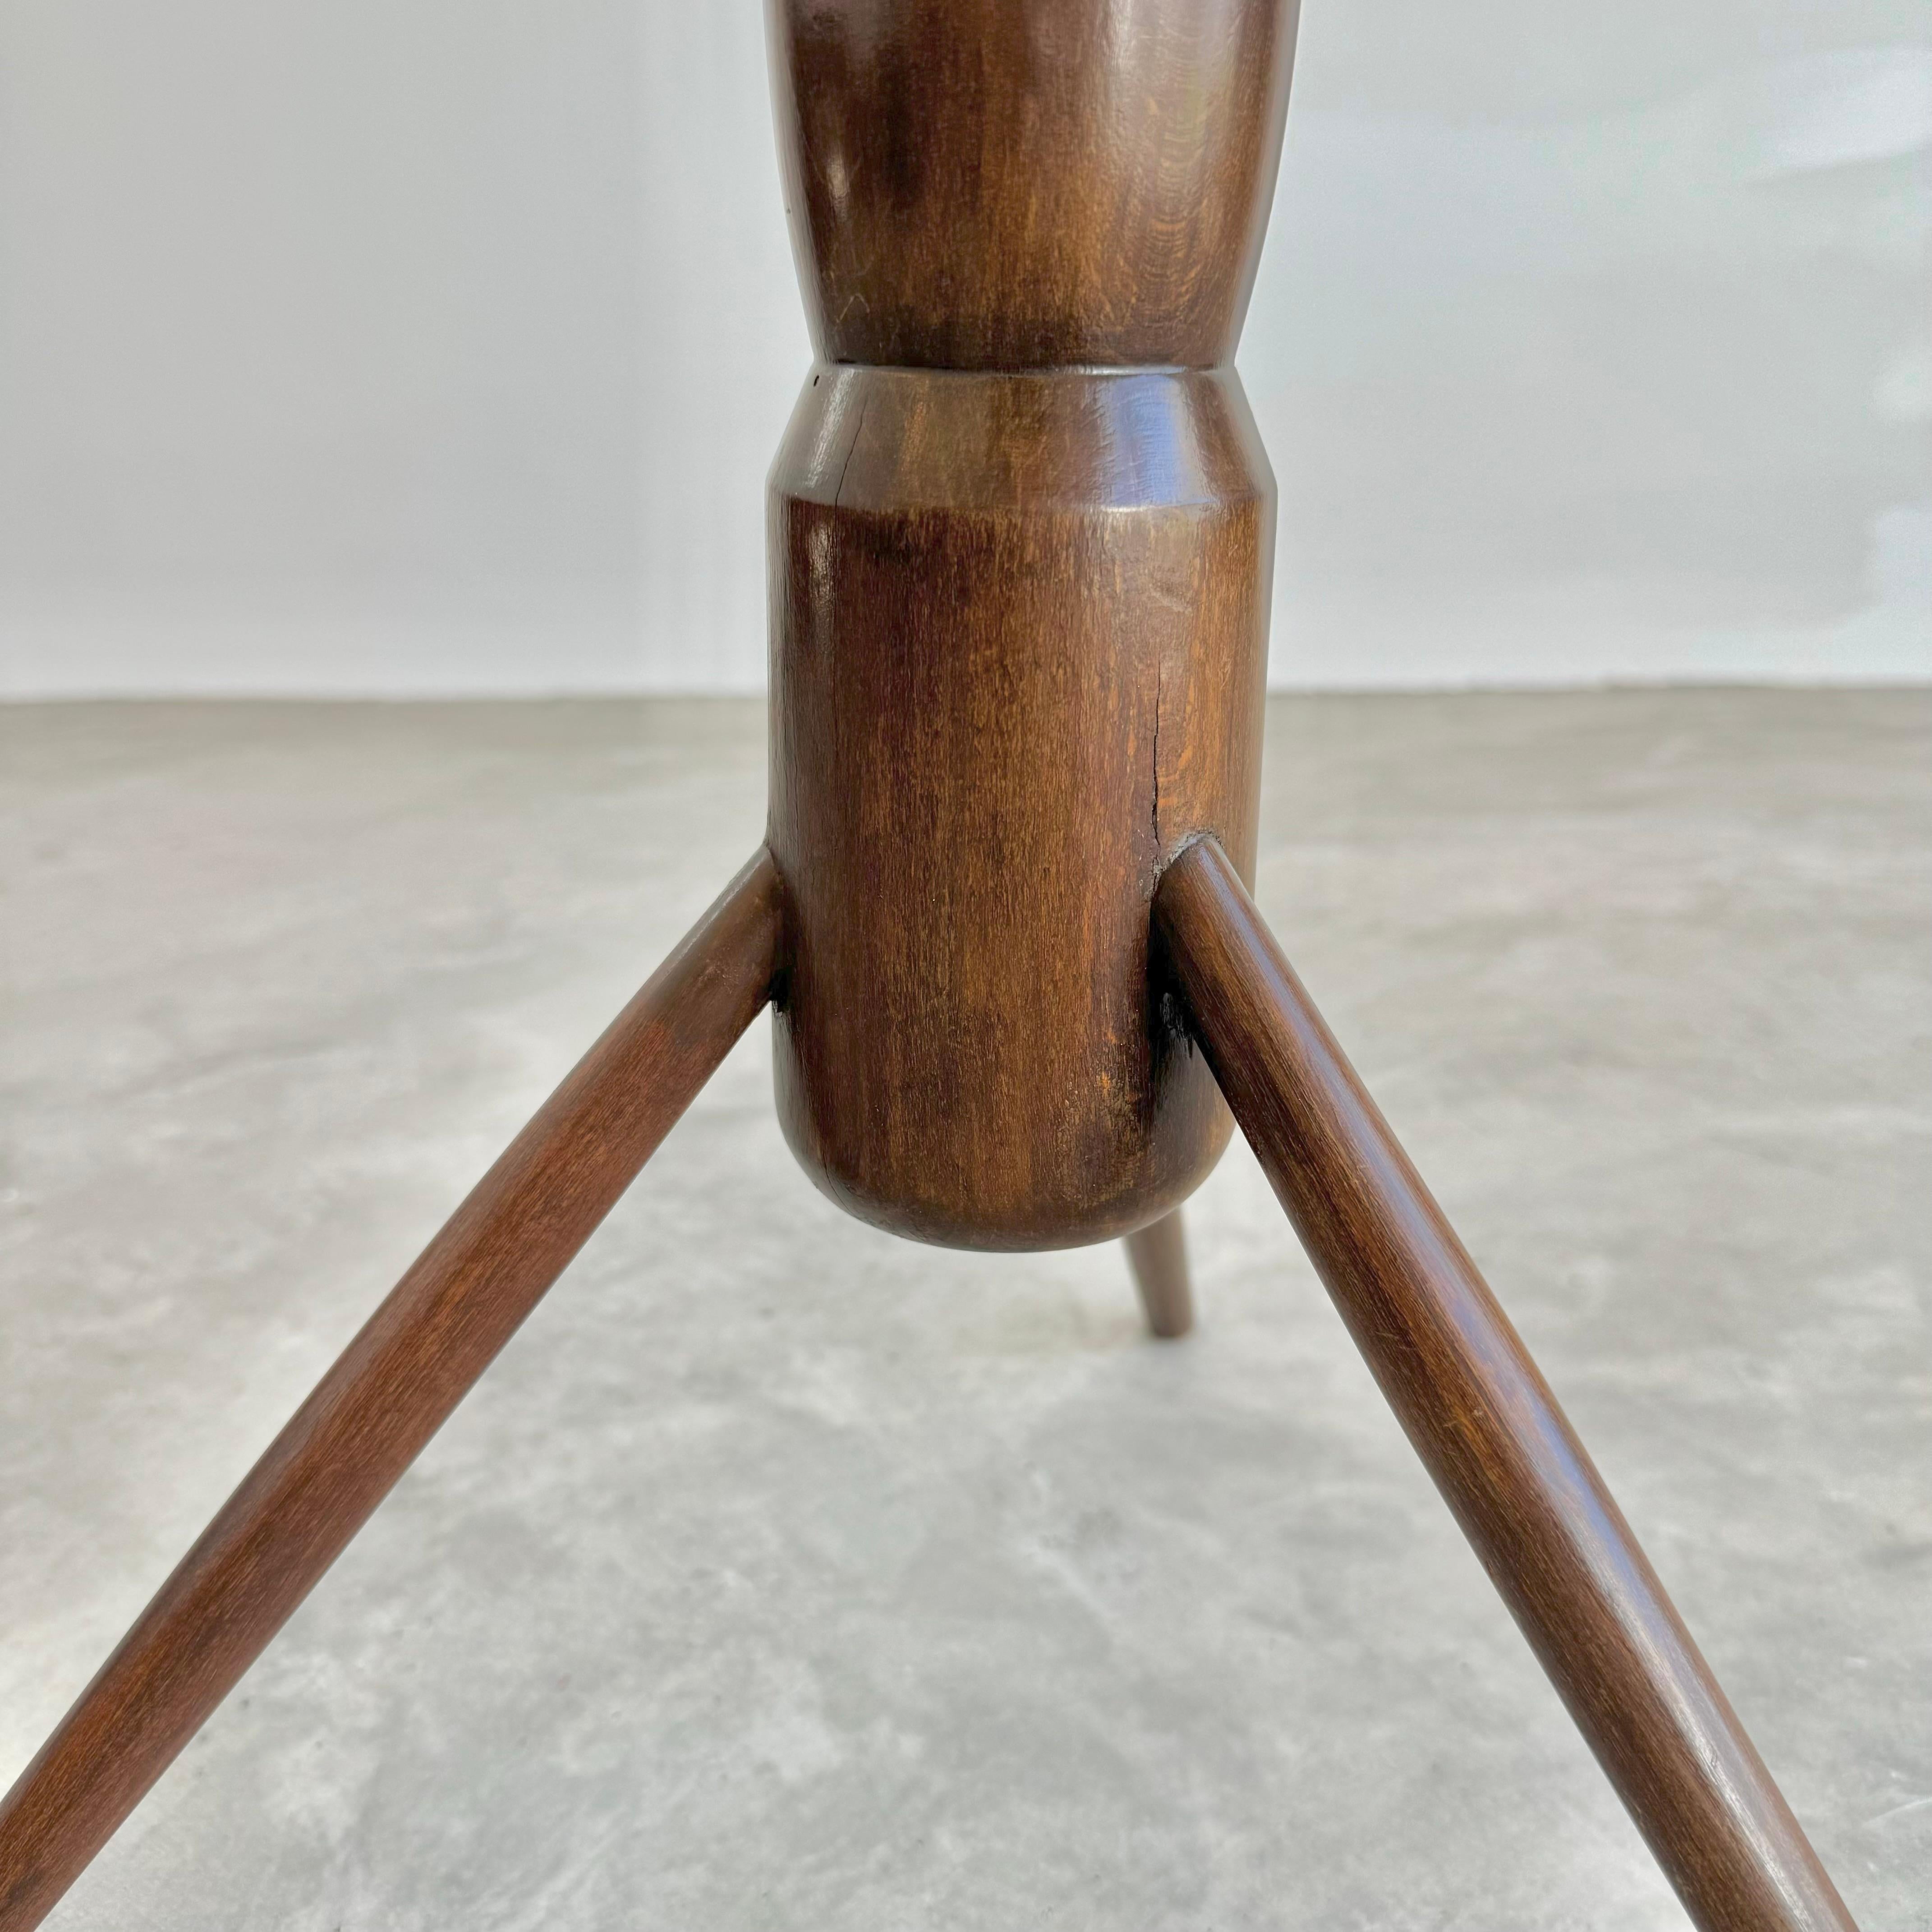 Wood and Glass Tripod Cocktail Table, 1950s Italy For Sale 10